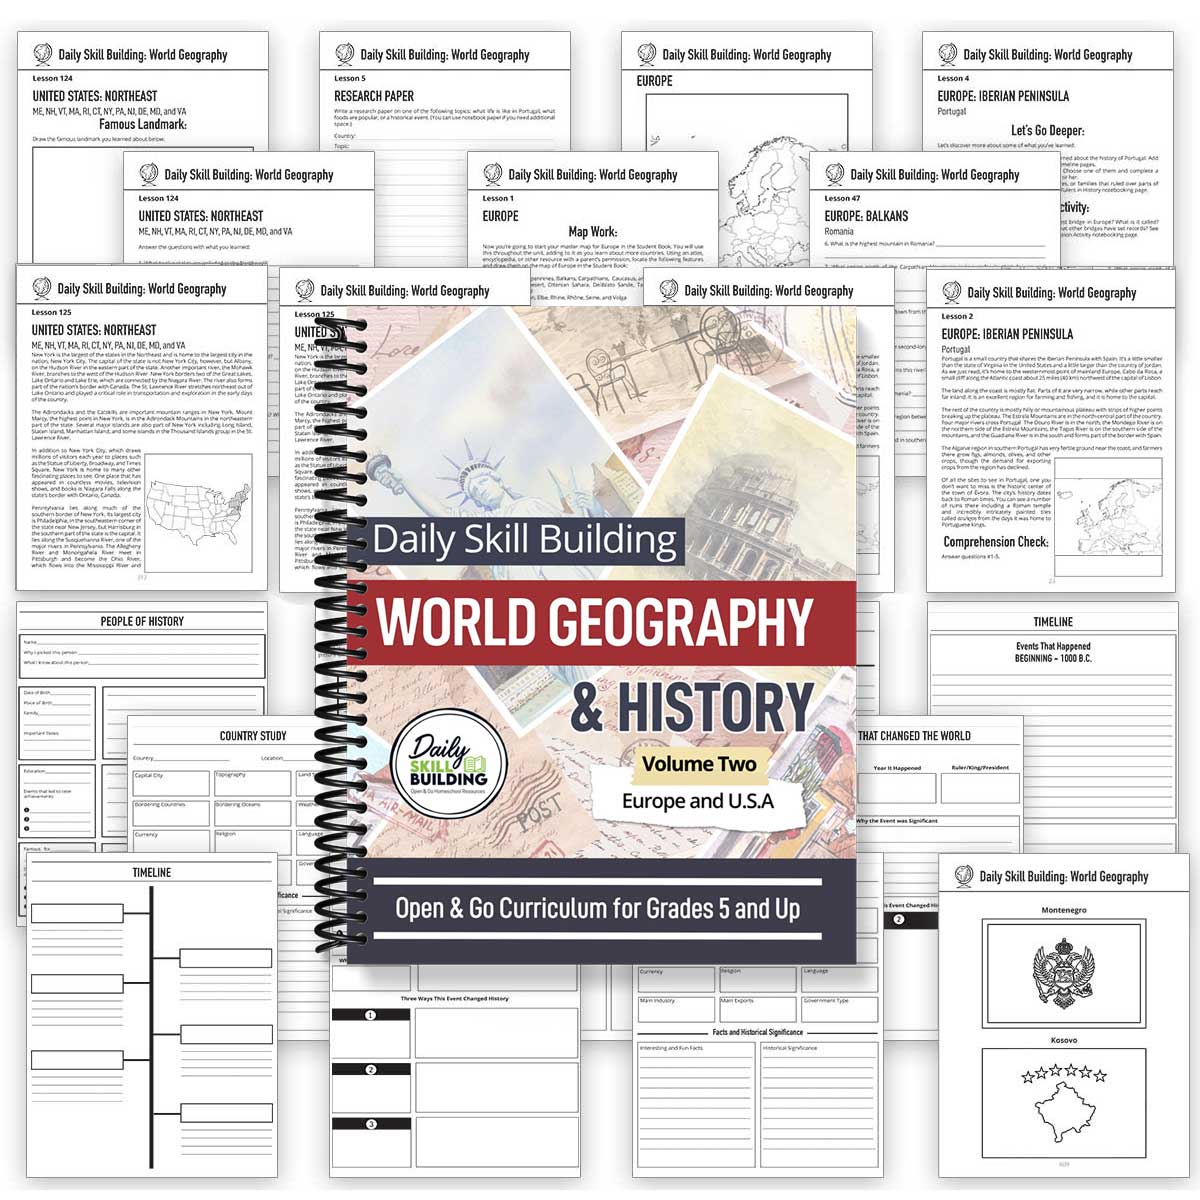 Daily Skill Building: World Geography & History Volume 1: Europe and U.S.A. Cover and Notebooking Pages